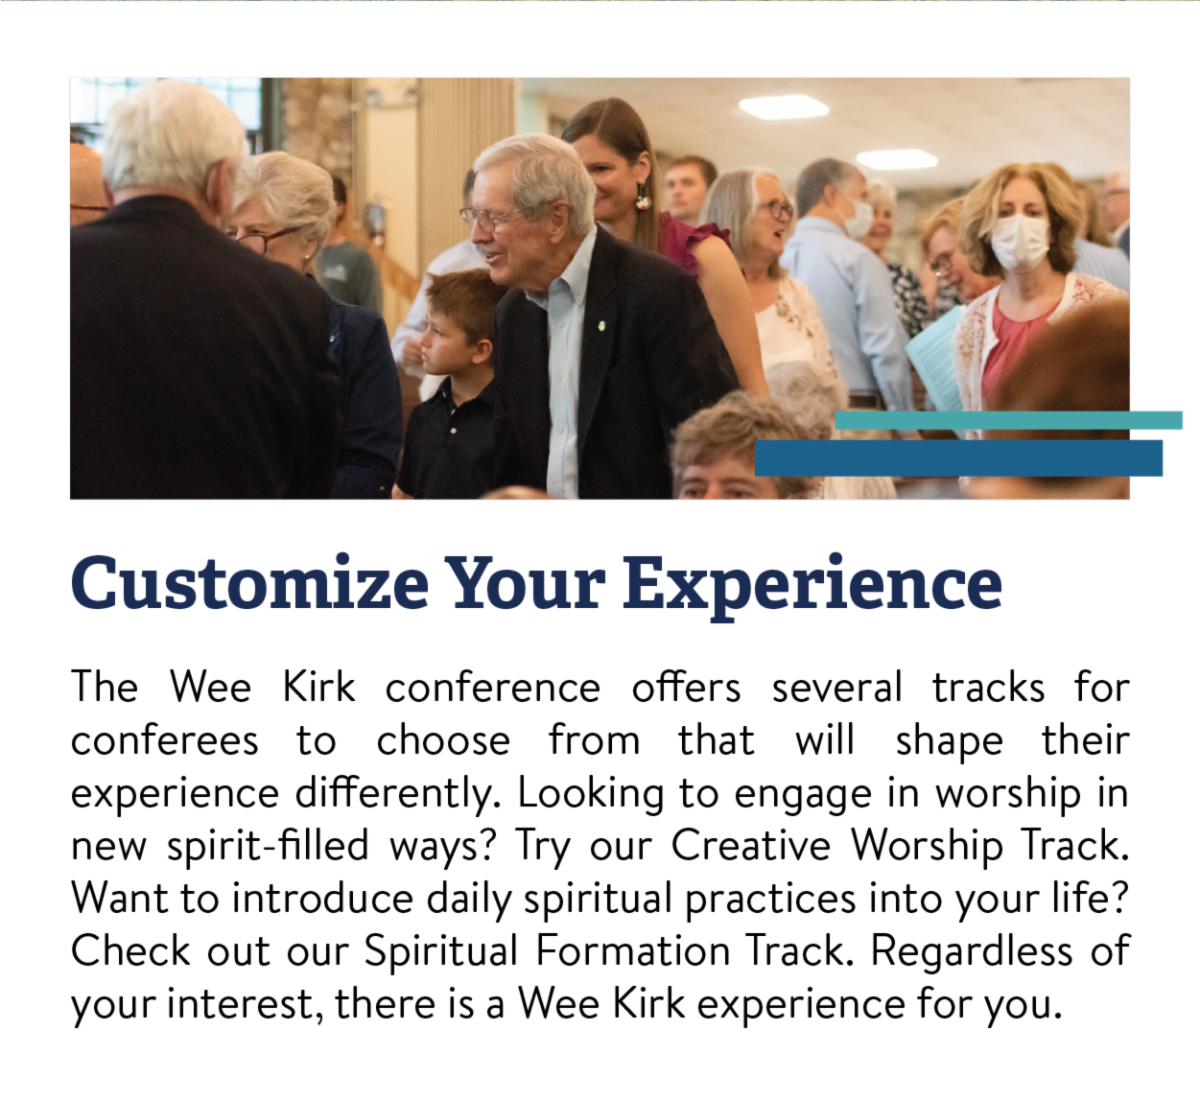 Customize Your Experience - The Wee Kirk conference offers several tracks for conferees to choose from that will shape their experience differently. Looking to engage in worship in new spirit-filled ways? Try our Creative Worship Track. Want to introduce daily spiritual practices into your life? Check out our Spiritual Formation Track. Regardless of your interest, there is a Wee Kirk experience for you.